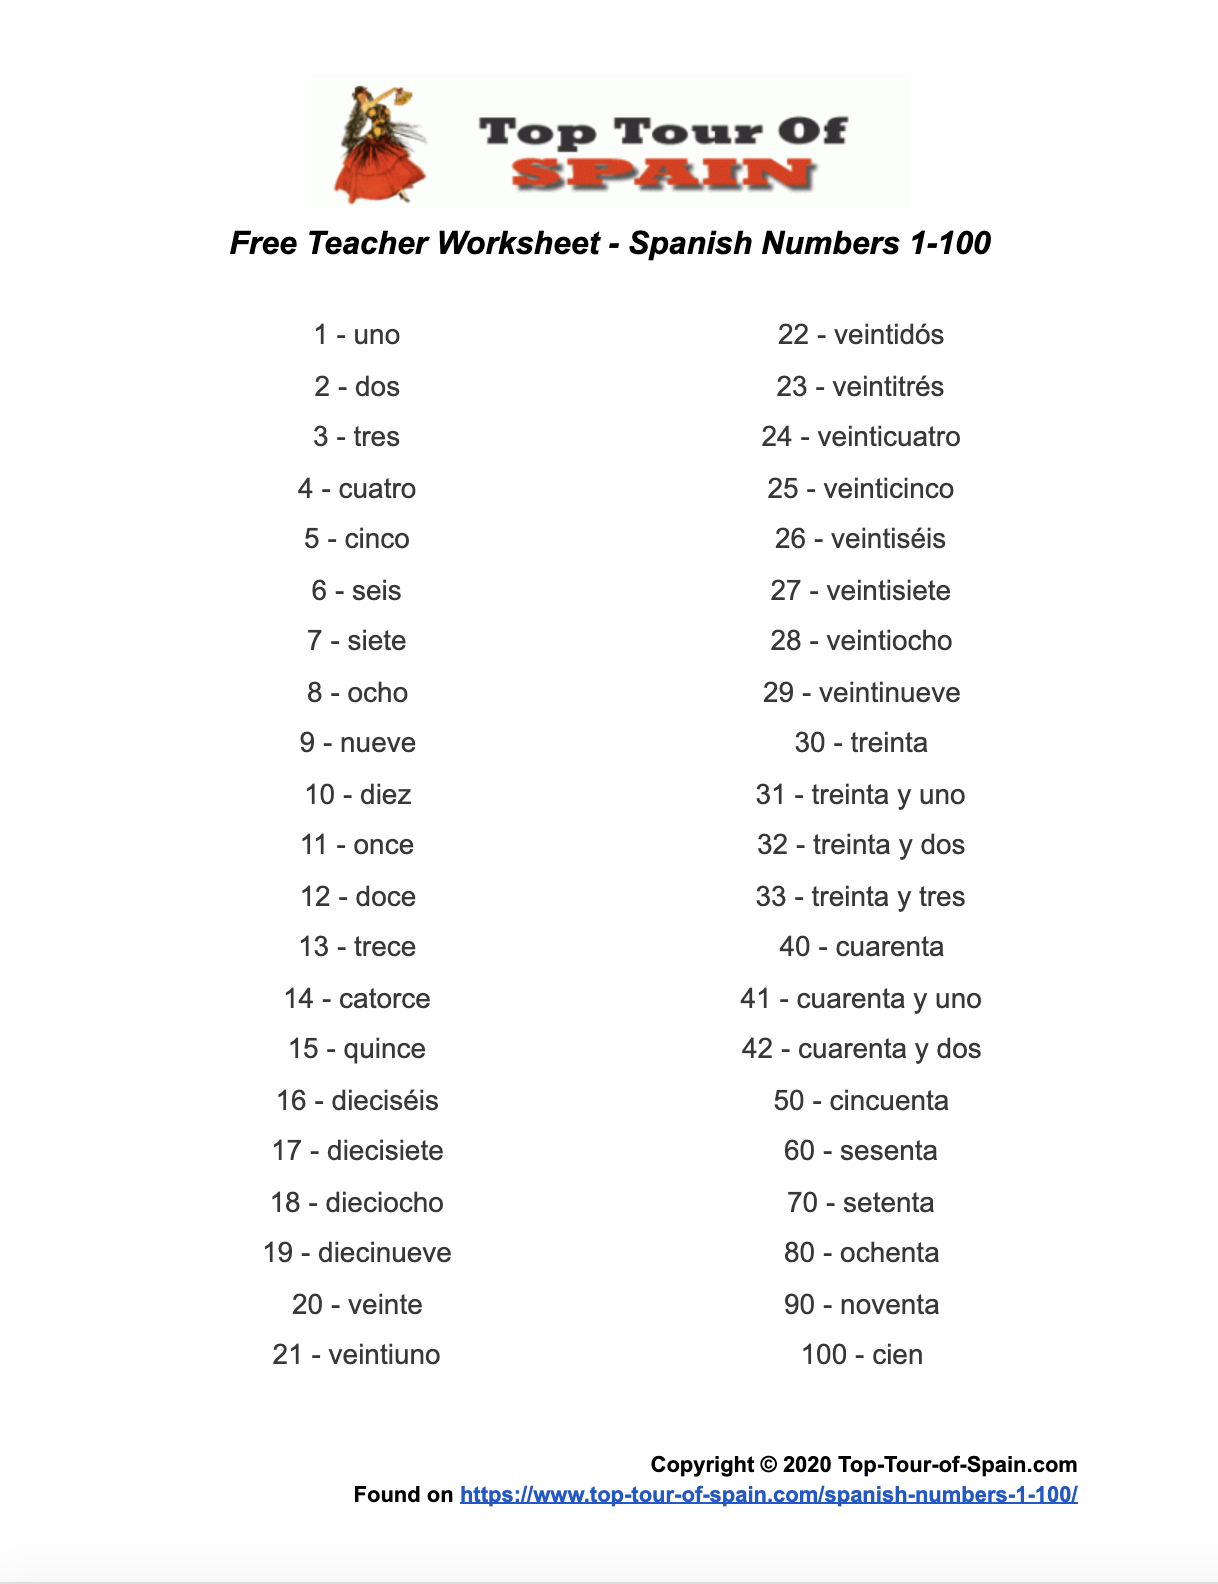 Spanish Numbers Learn Numbers In Spanish 1 100 Top Tour Of Spain